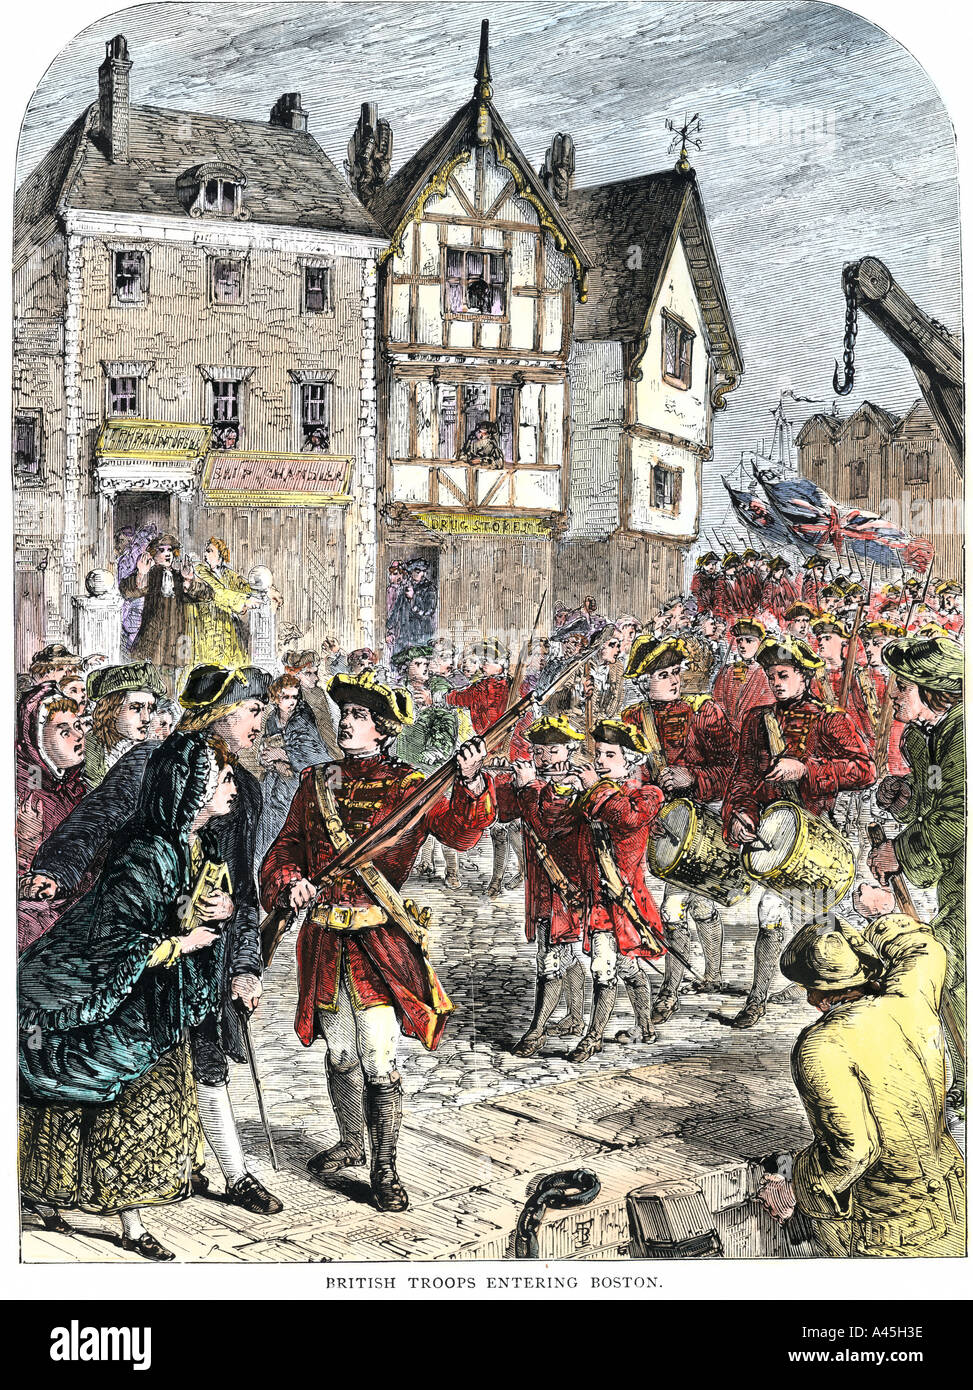 British troops entering Boston to enforce taxation and other colonial legislation before the American Revolution. Hand-colored woodcut Stock Photo